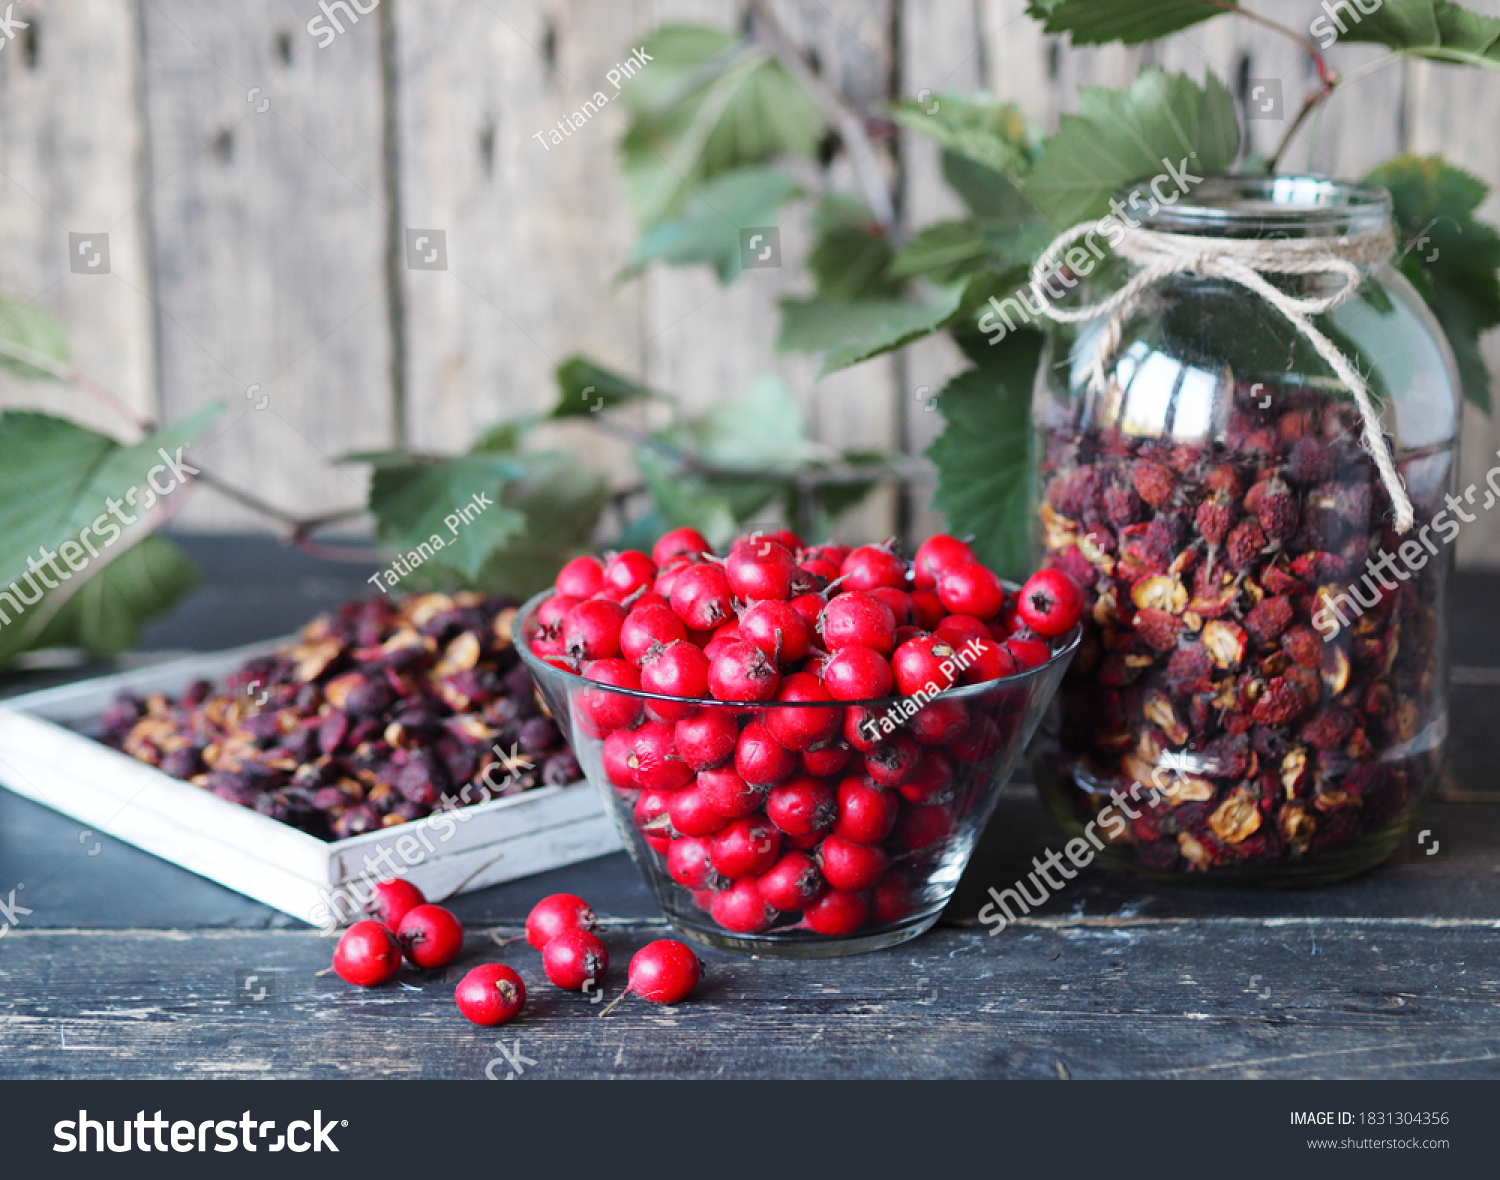 Useful properties of hawthorn berries. Harvesting of dried hawthorn for future use. Fresh red and dried hawthorn on a wooden background.Alternative traditional medicine using hawthorn. #1831304356